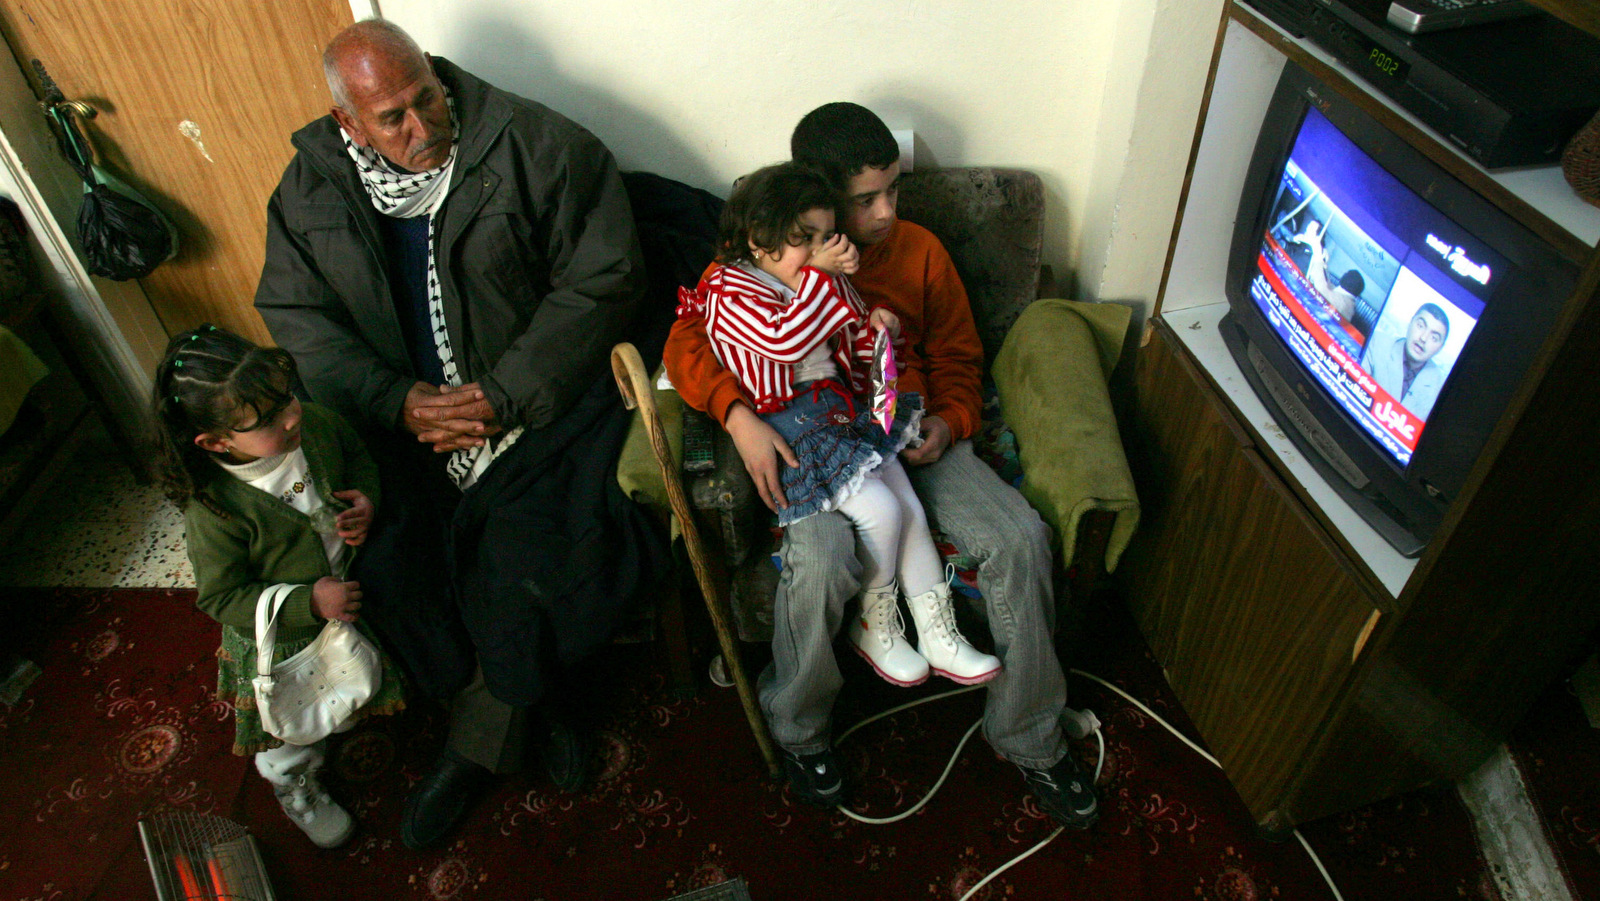 A Palestinian family watches Saudi state-owned Al-Arabiya TV transmitting a video of the execution of Saddam Hussein, in the West Bank town of Ramallah, Dec. 30, 2006. (AP/Muhammed Muheisen)